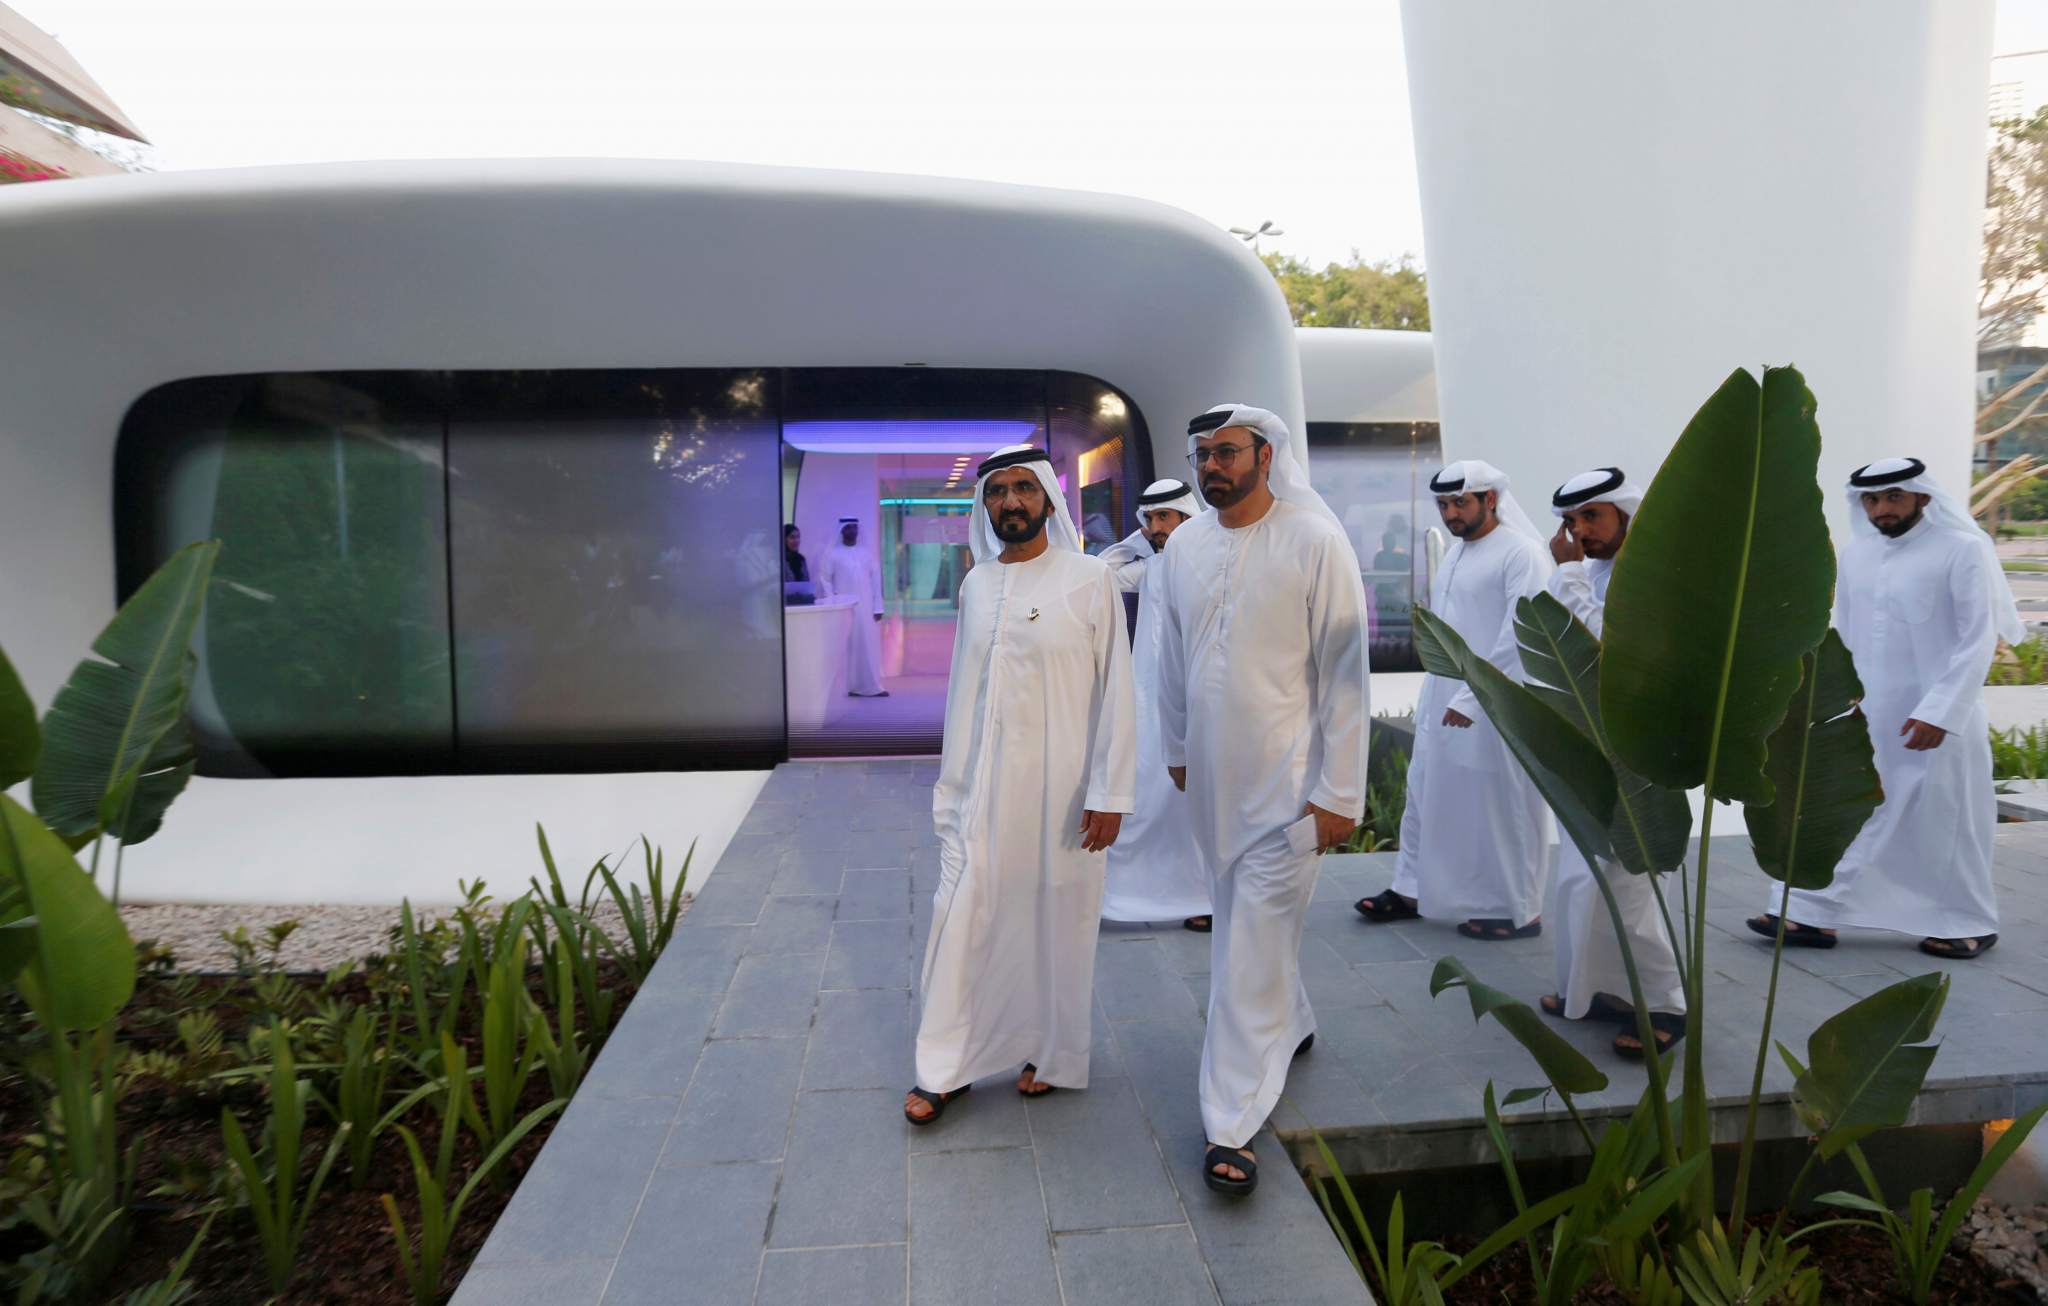 Sheikh Mohammed bin Rashid Al Maktoum, Vice-President and Prime Minister of the UAE and Ruler of Dubai, at the Dubai Future Foundation office - the first functional 3D printed offices in Dubai. Photo via: REUTERS/Ahmed Jadallah